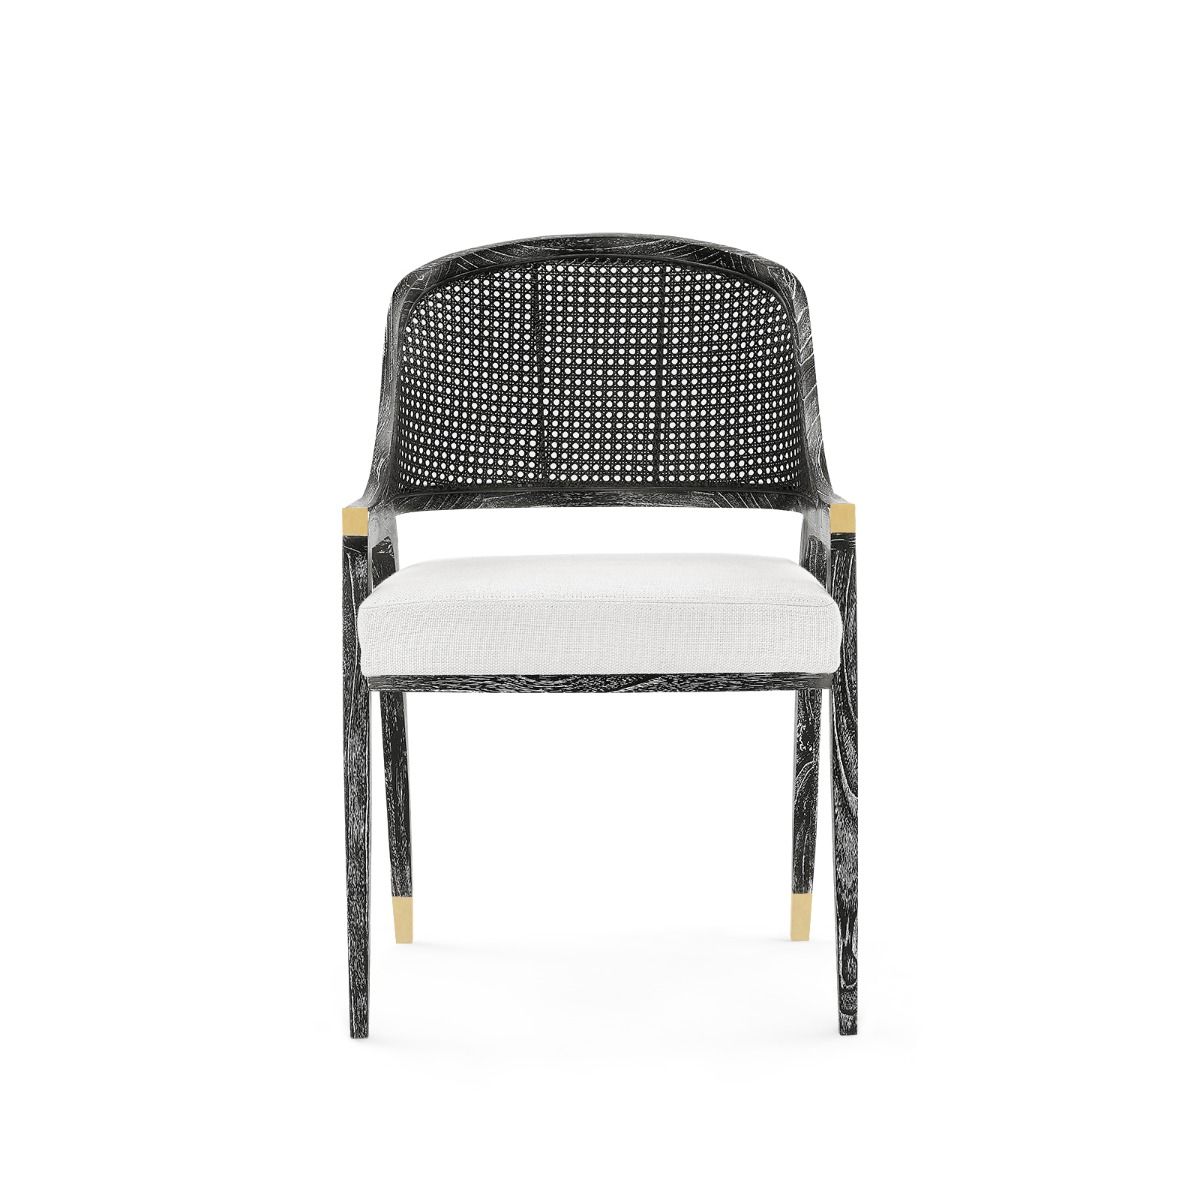 Load image into Gallery viewer, Edward Chair Dining Chair Bungalow 5     Four Hands, Burke Decor, Mid Century Modern Furniture, Old Bones Furniture Company, Old Bones Co, Modern Mid Century, Designer Furniture, https://www.oldbonesco.com/
